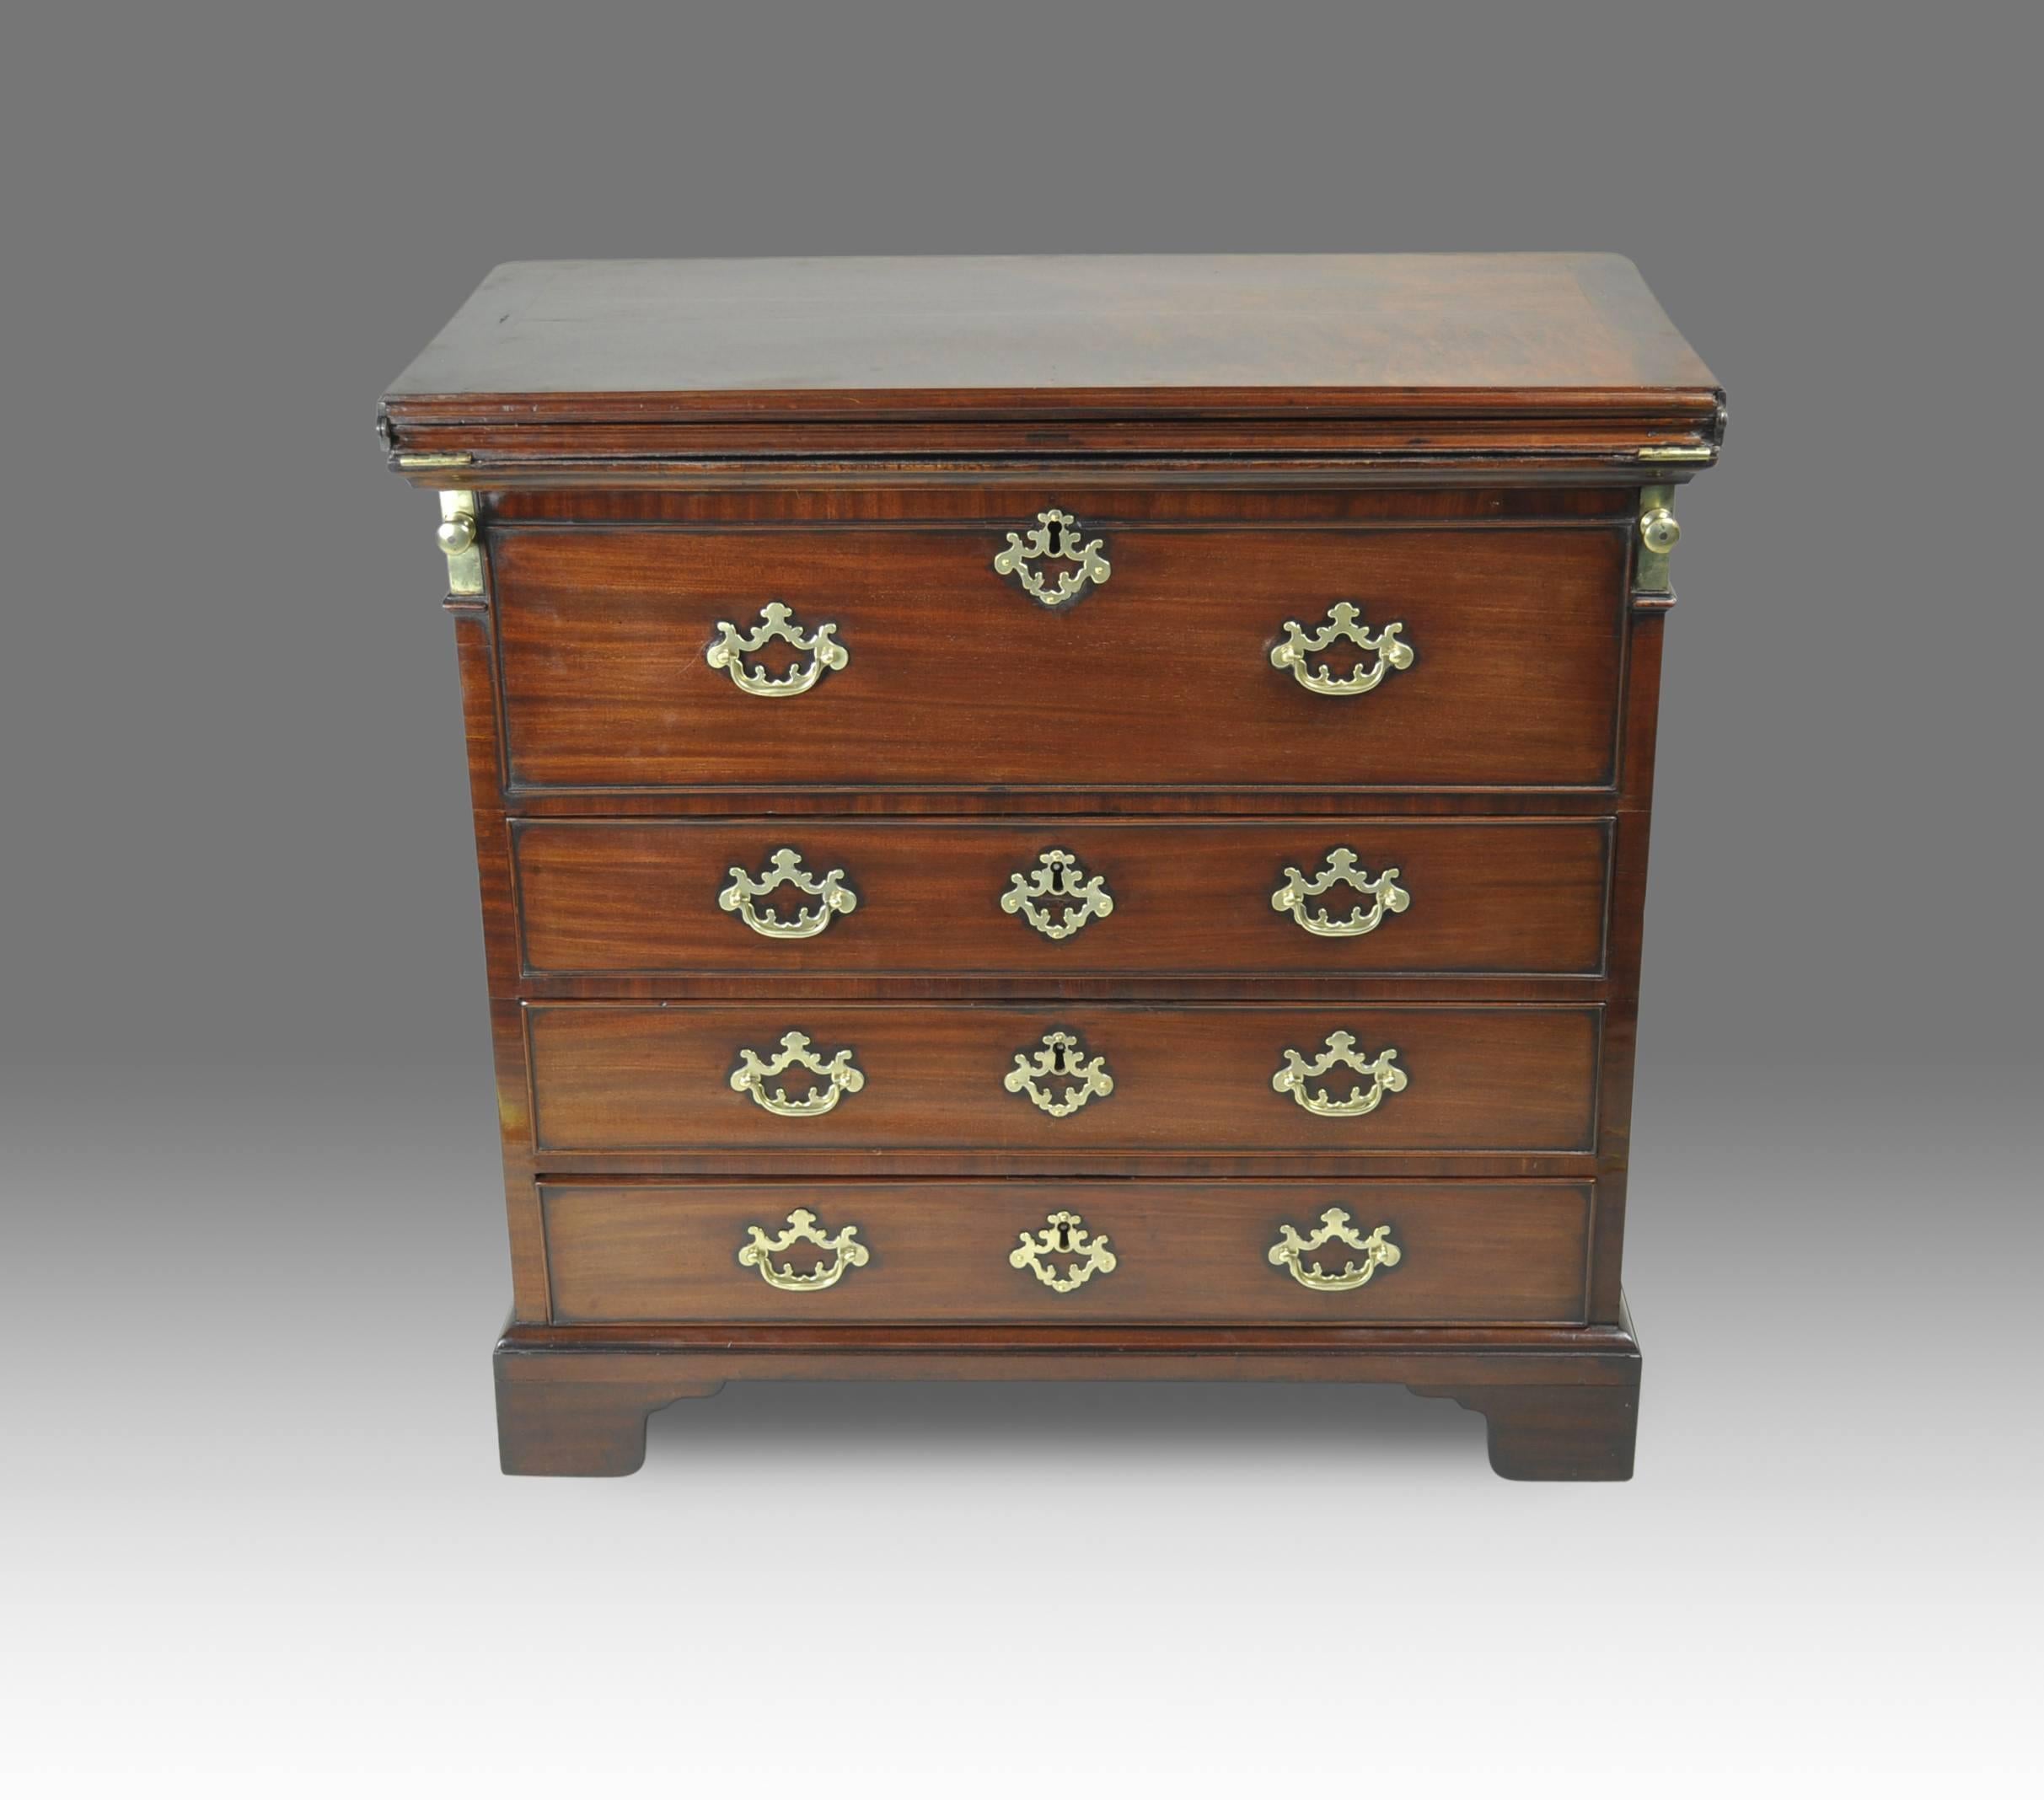 FOR A VIDEO DESCRIPTION OF THIS ITEM, COPY AND PASTE THIS LINK:  https://youtu.be/WcBsjfE-rkc 

An exceptionally rare metamorphic mid-18th century bachelor’s Chest in mahogany with brass hardware. The fold-over top opening to reveal a polished